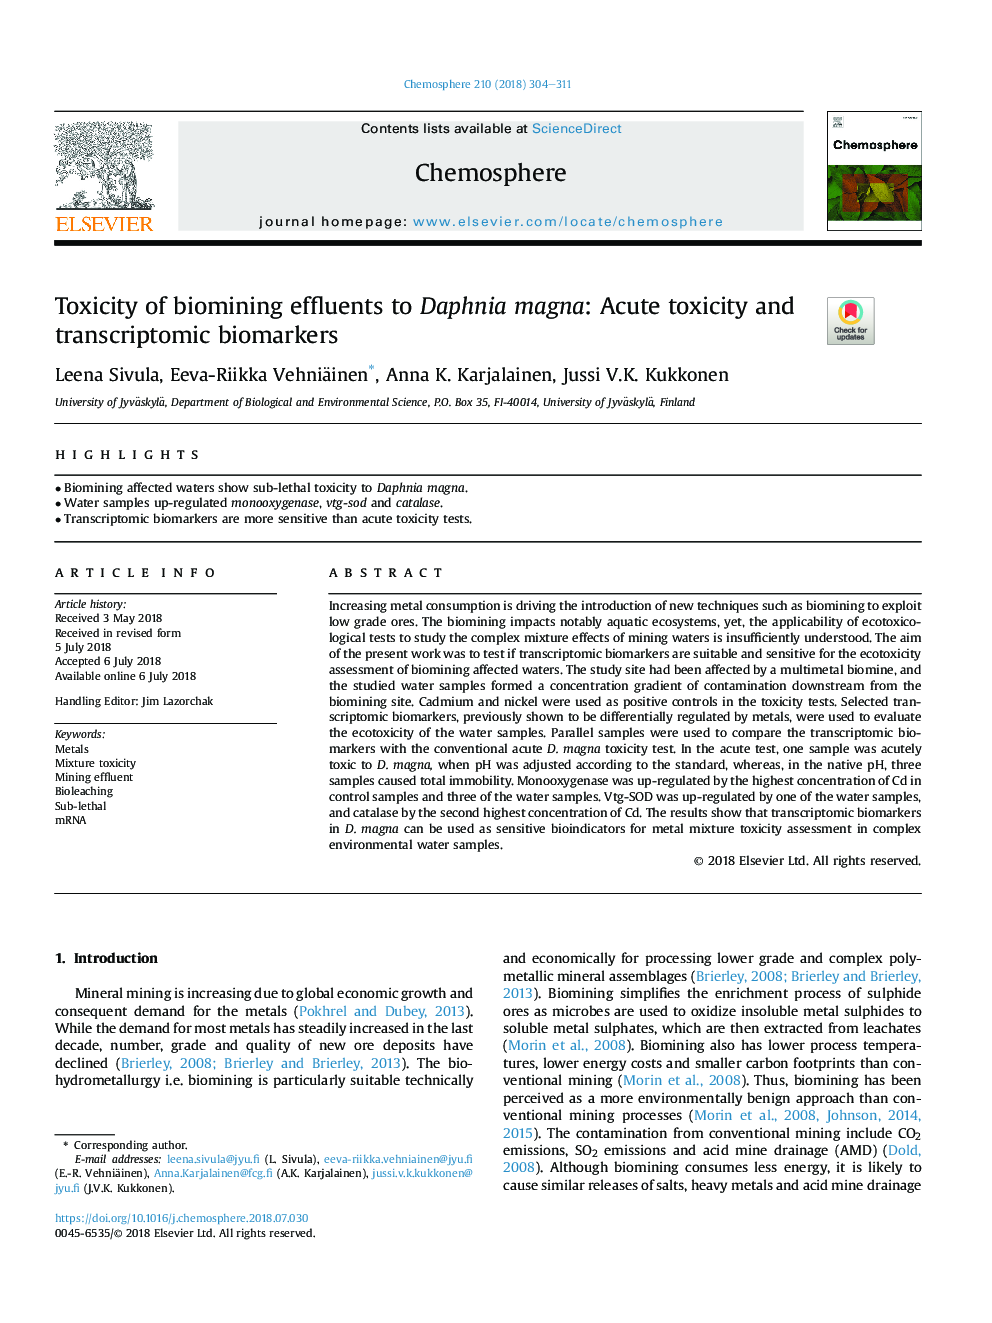 Toxicity of biomining effluents to Daphnia magna: Acute toxicity and transcriptomic biomarkers